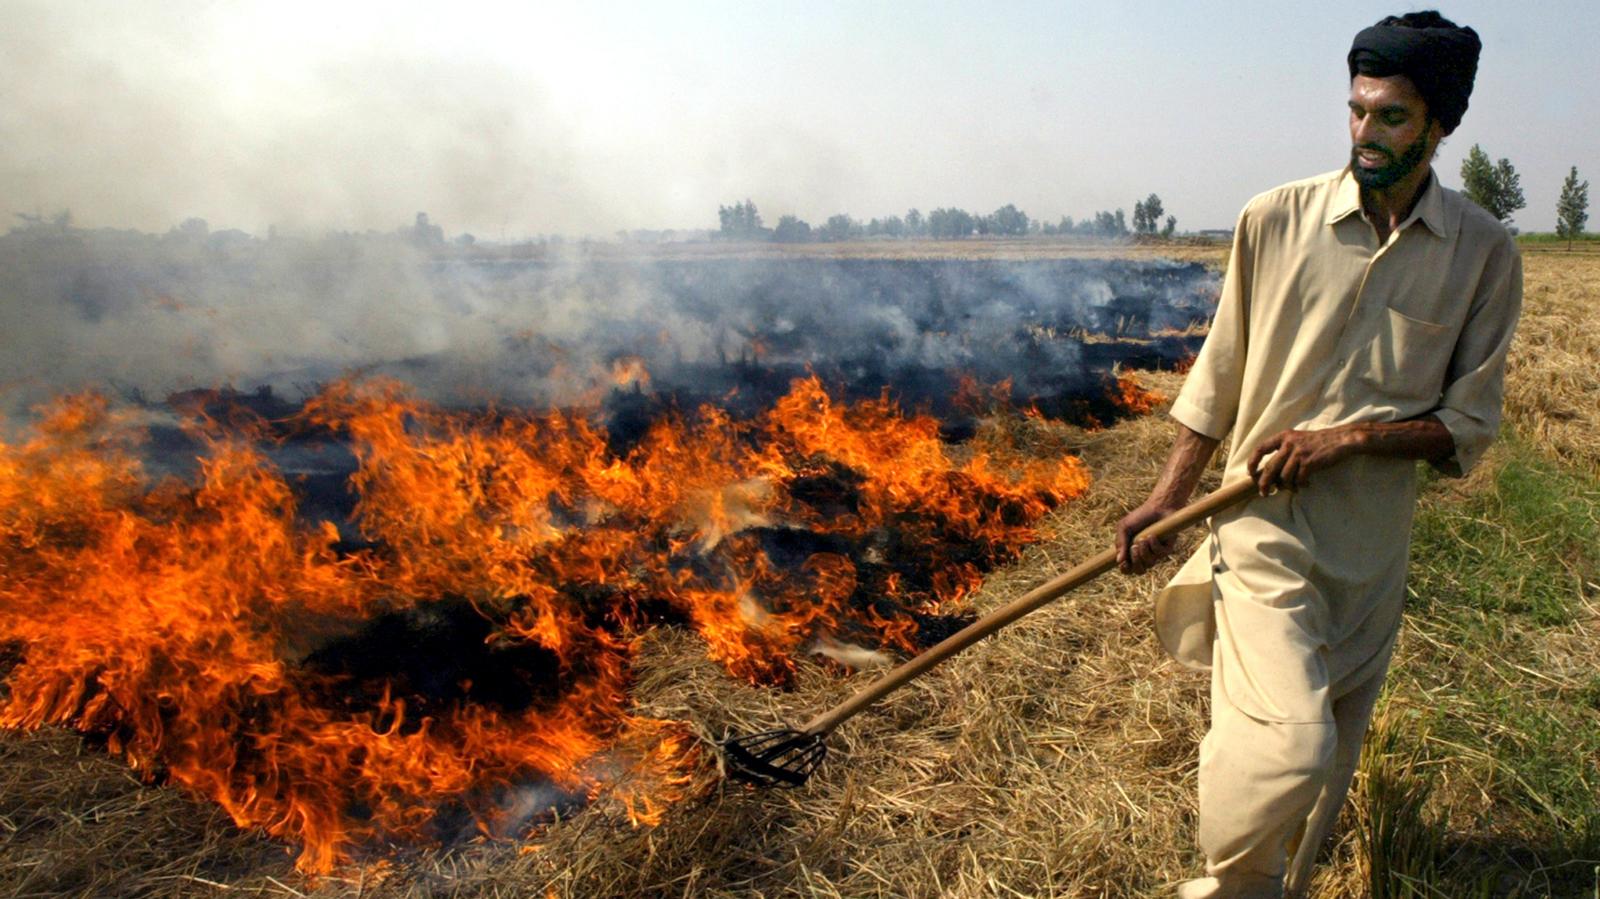 due to ongoing crop residue burning DM forms monitoring committee, imposes ban. 